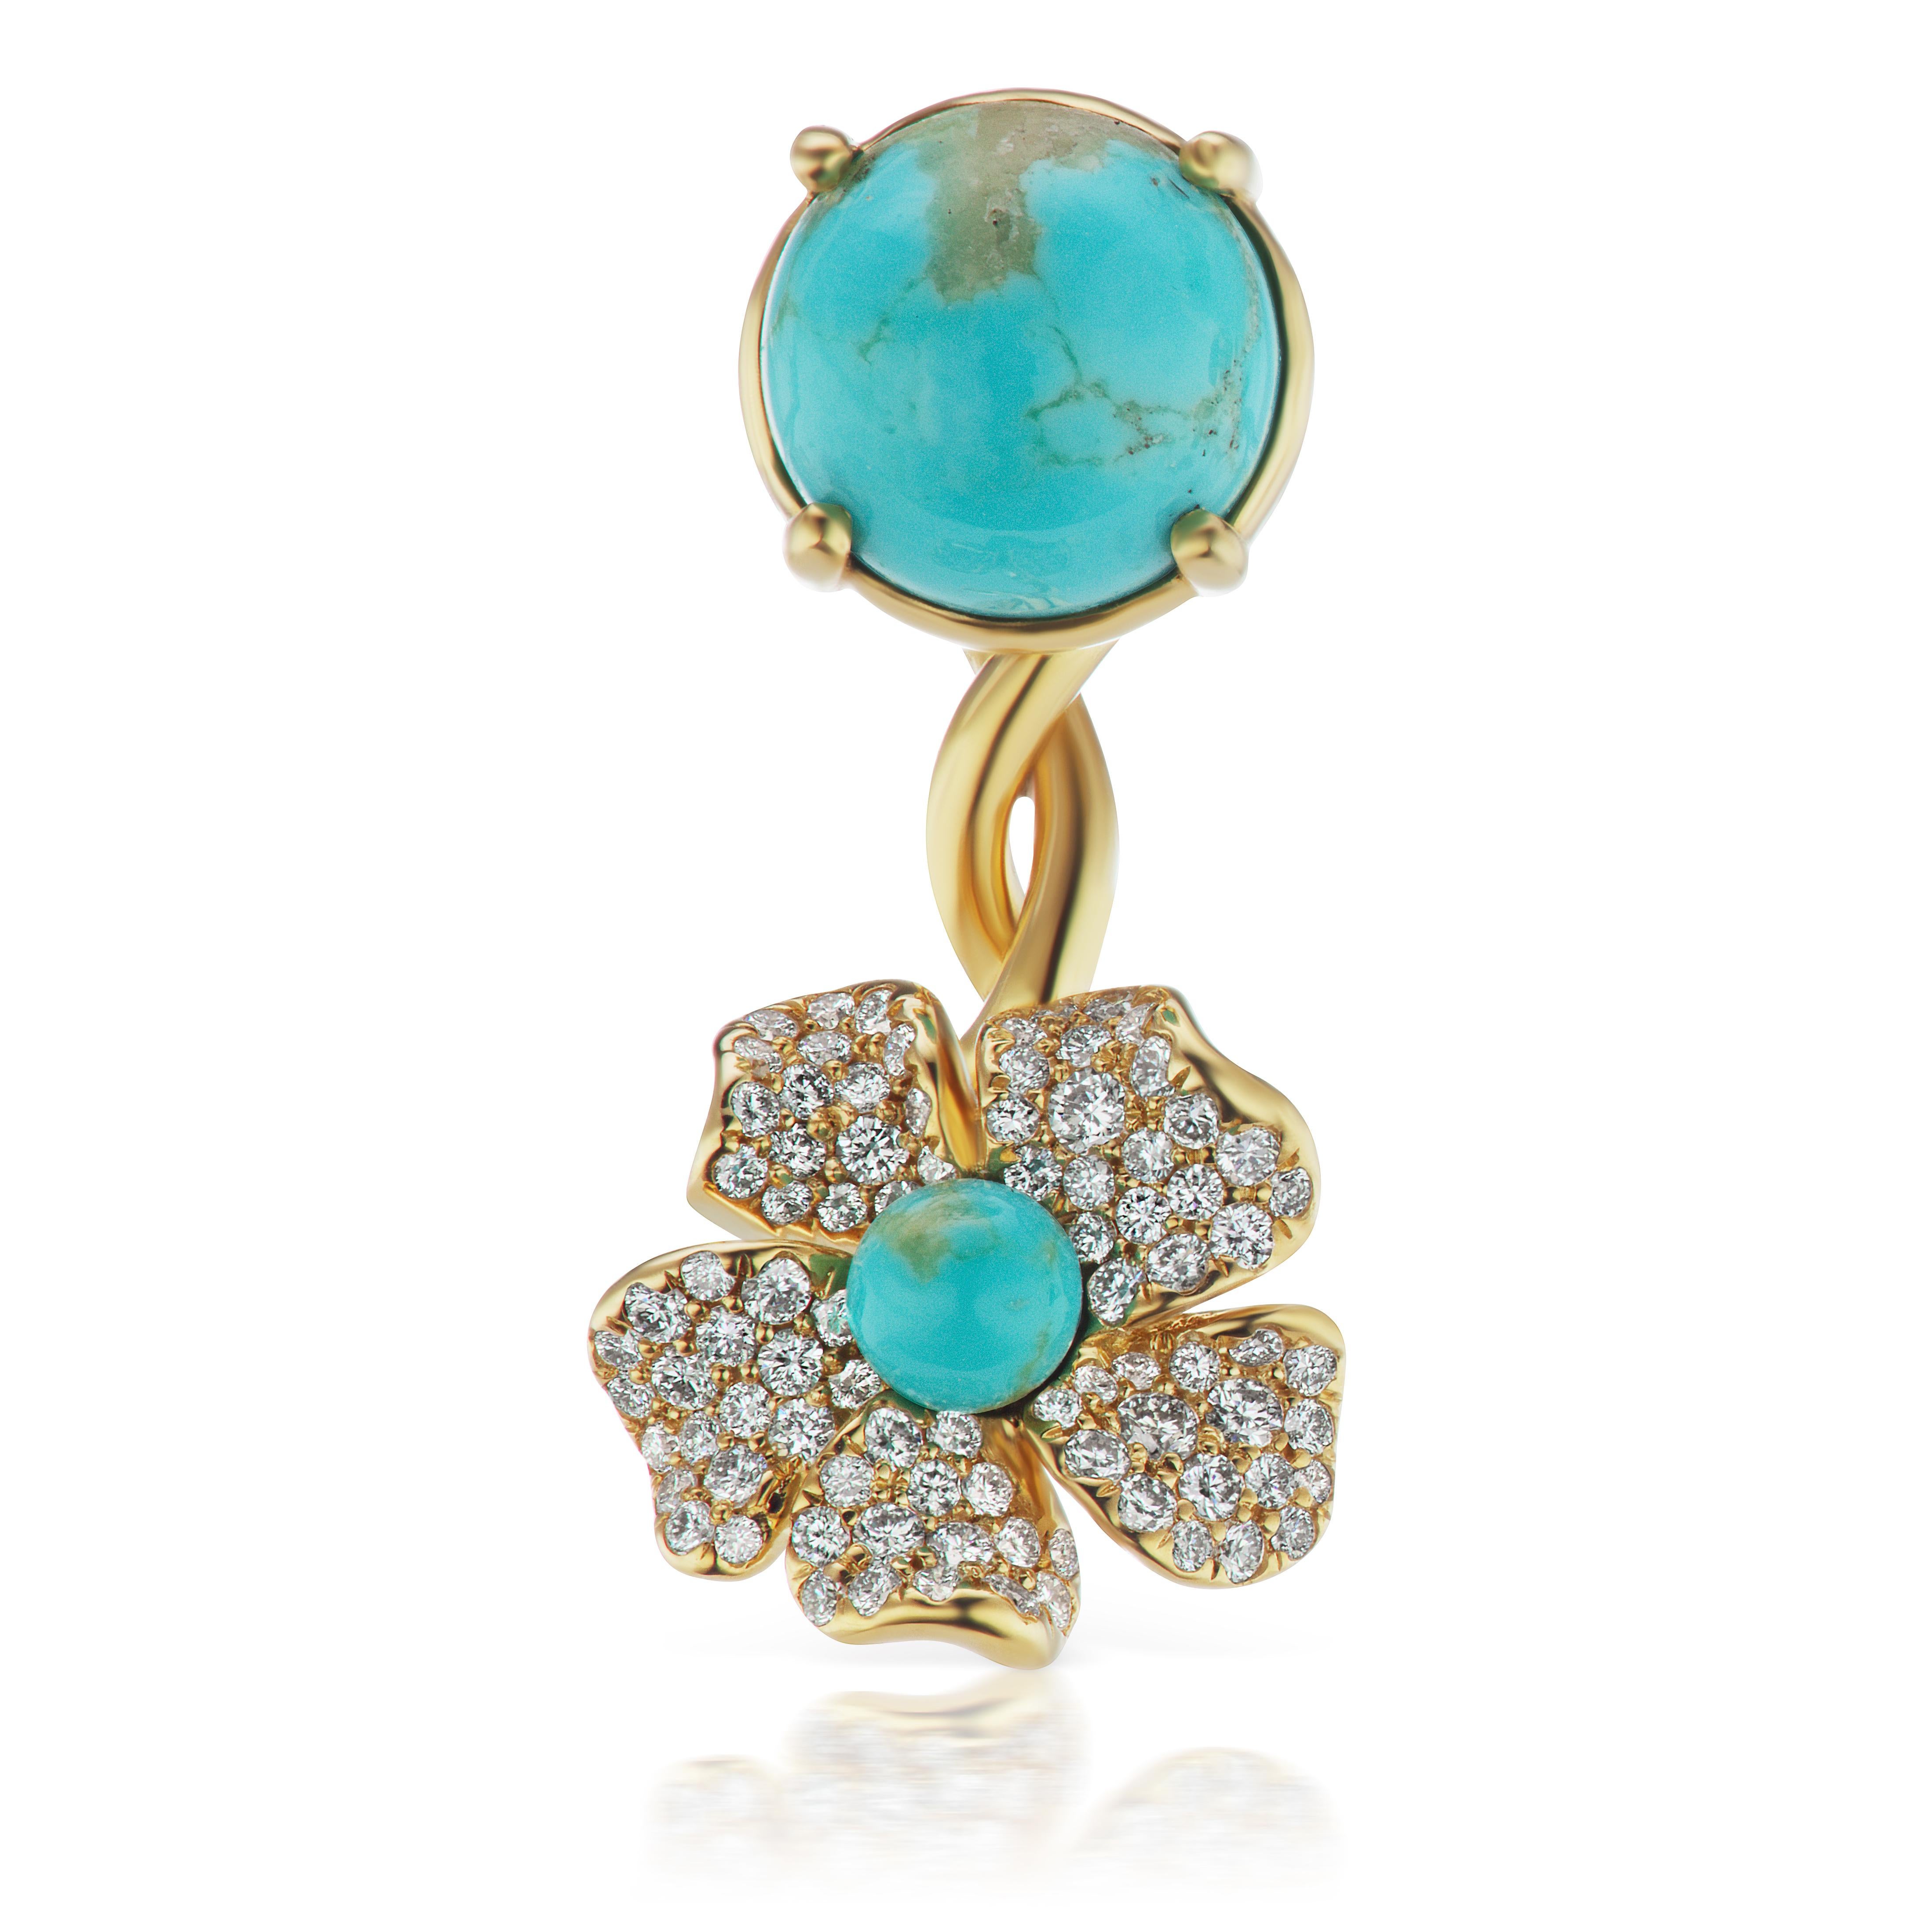 18K Yellow Gold Flower Earring with Turquoise and Diamonds
0.66 ct tw.
1.25